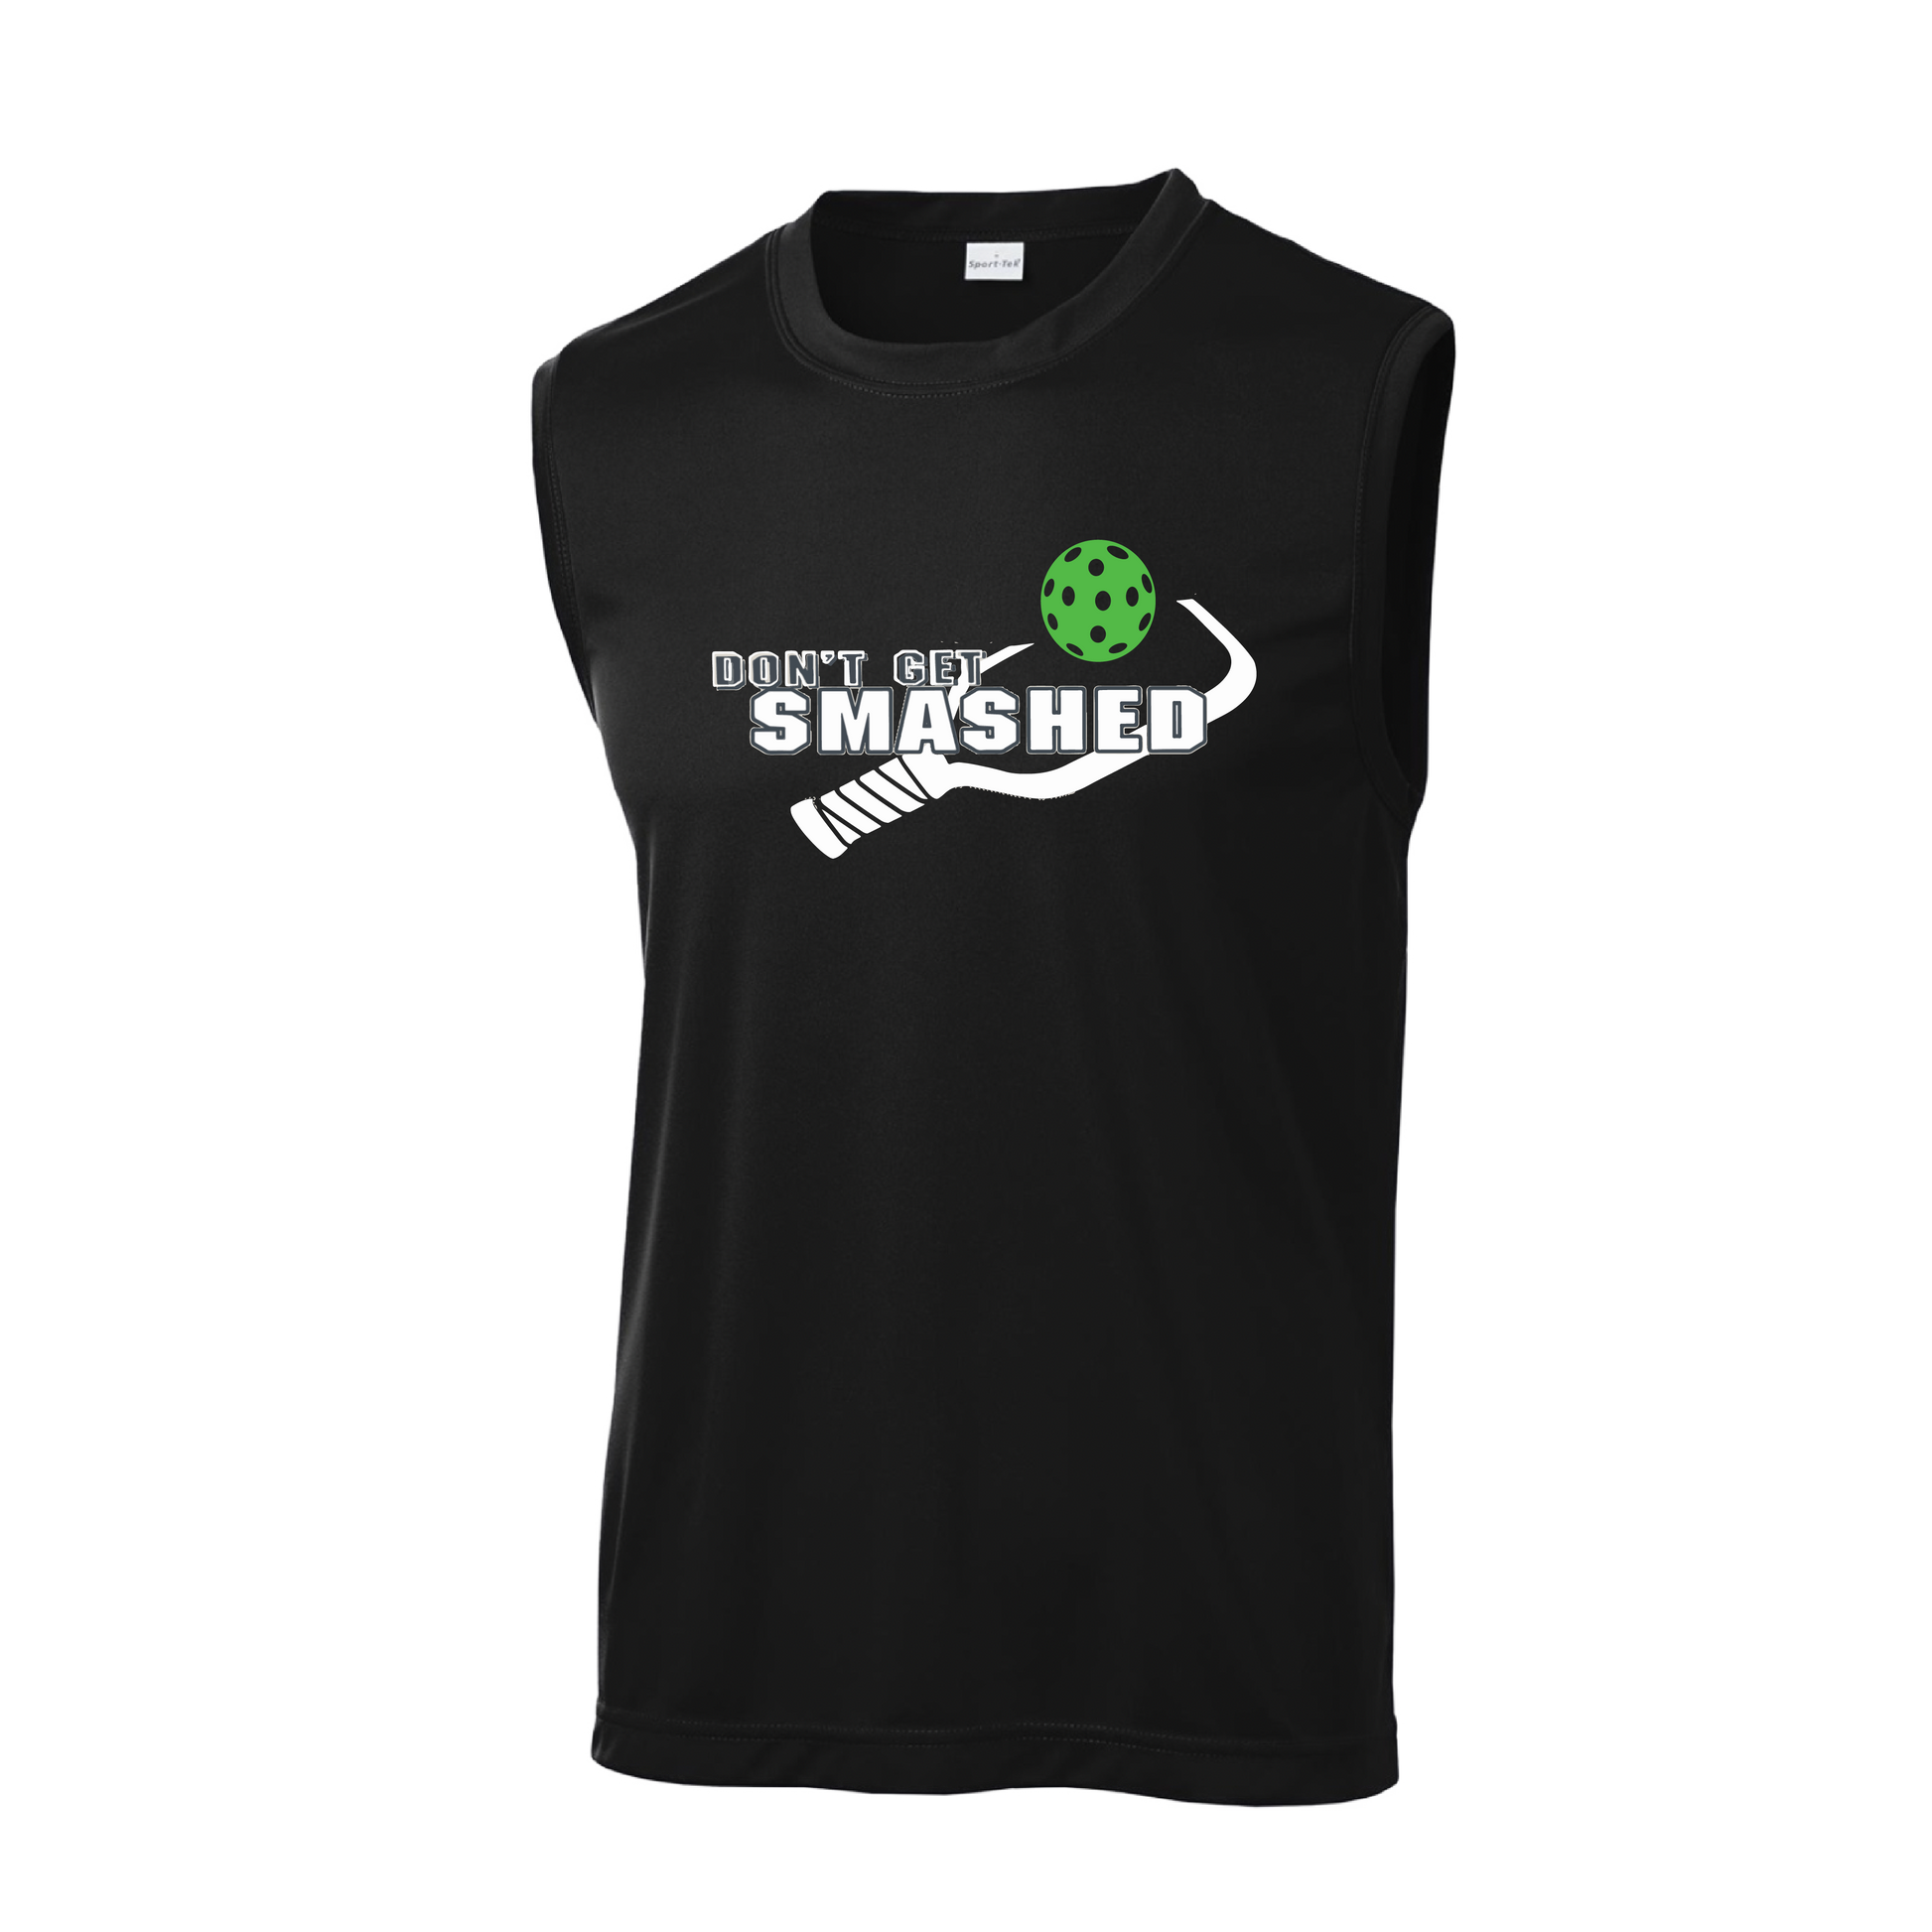 Men's Styles: Sleeveless (SL)  These lightweight, roomy, and highly breathable shirts are a must-have for any athlete! Featuring PosiCharge technology for vibrant colors and logos that won't fade, plus a comfortable removable tag and set-in sleeves - don't miss out on this pickleball shirt!